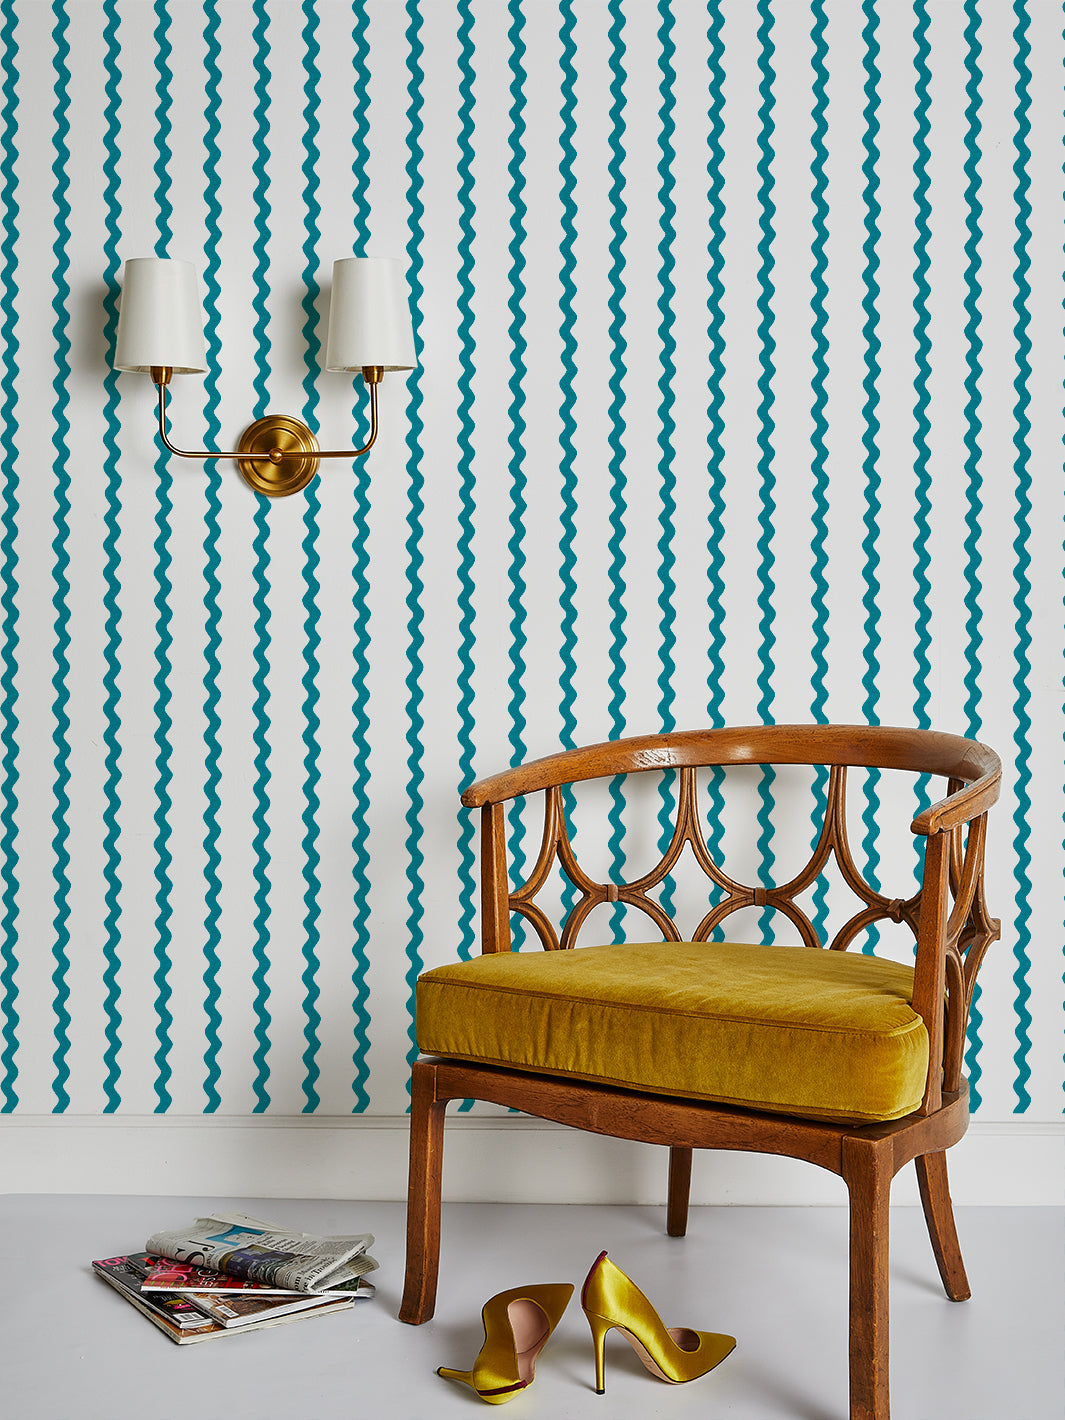 'Ric-Rac Stripe on White' Wallpaper by Sarah Jessica Parker - Peacock